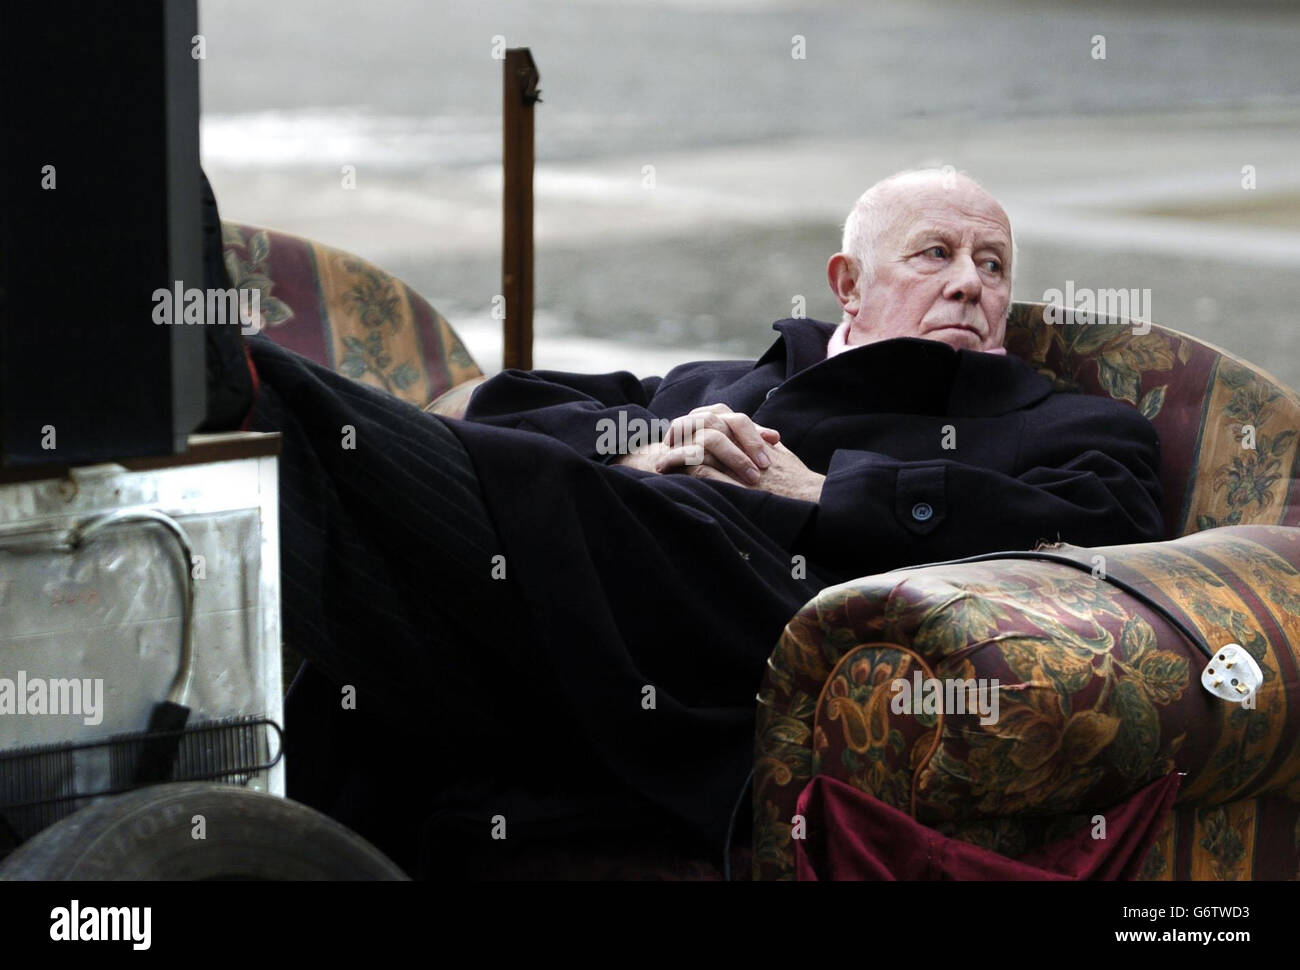 Actor Richard Wilson at the International Conference Centre in Edinburgh, launched the Keep Scotland Beautiful campaign, which highlights the problem of illegal dumping. The One Foot in the Grave star was supporting a crackdown on fly-tippers. Stock Photo